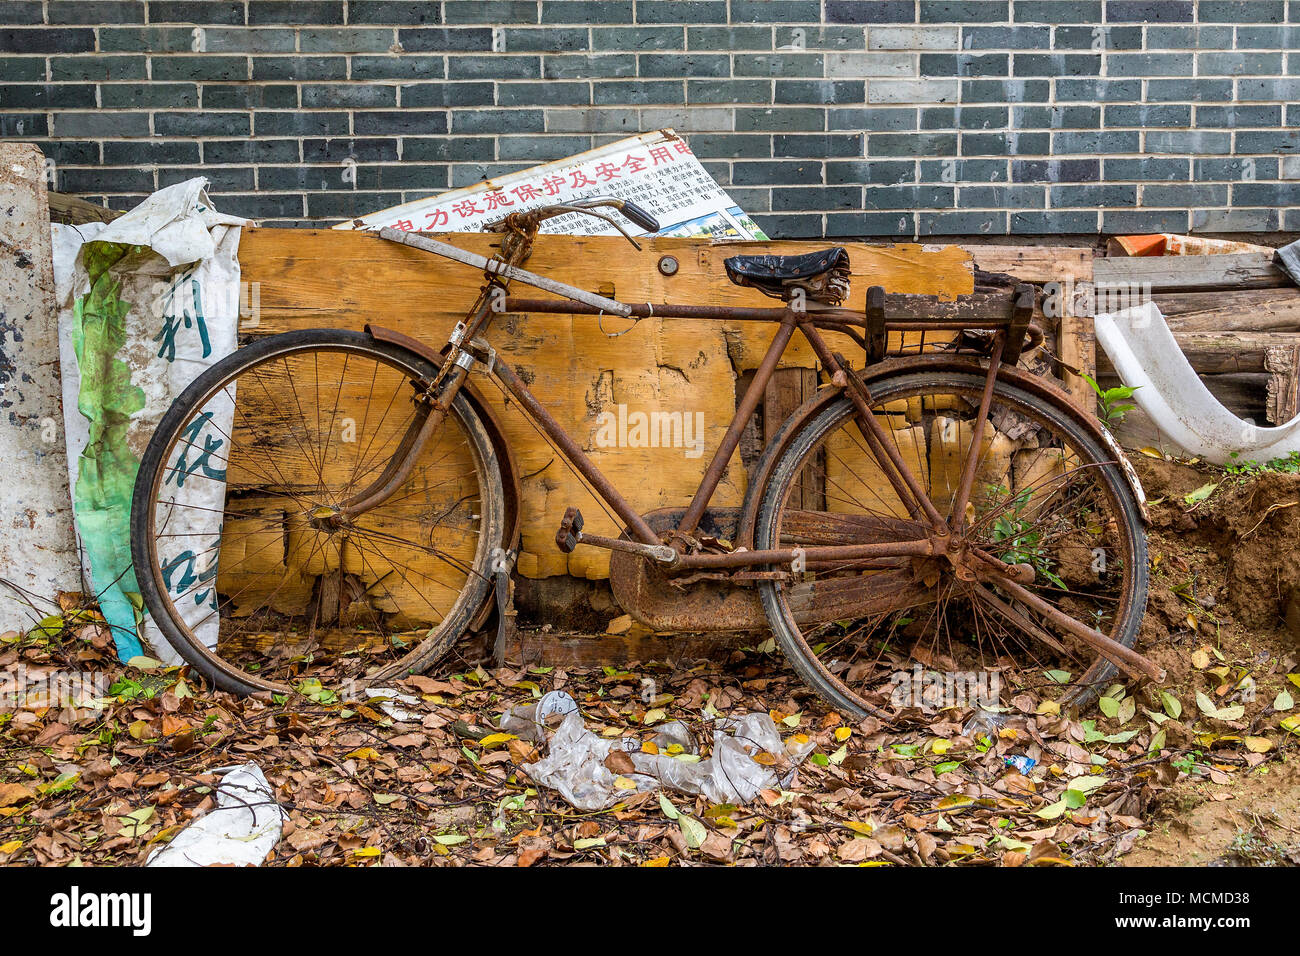 An old, rust-covered bicycle stands forgotten amongst debris and decay. Stock Photo